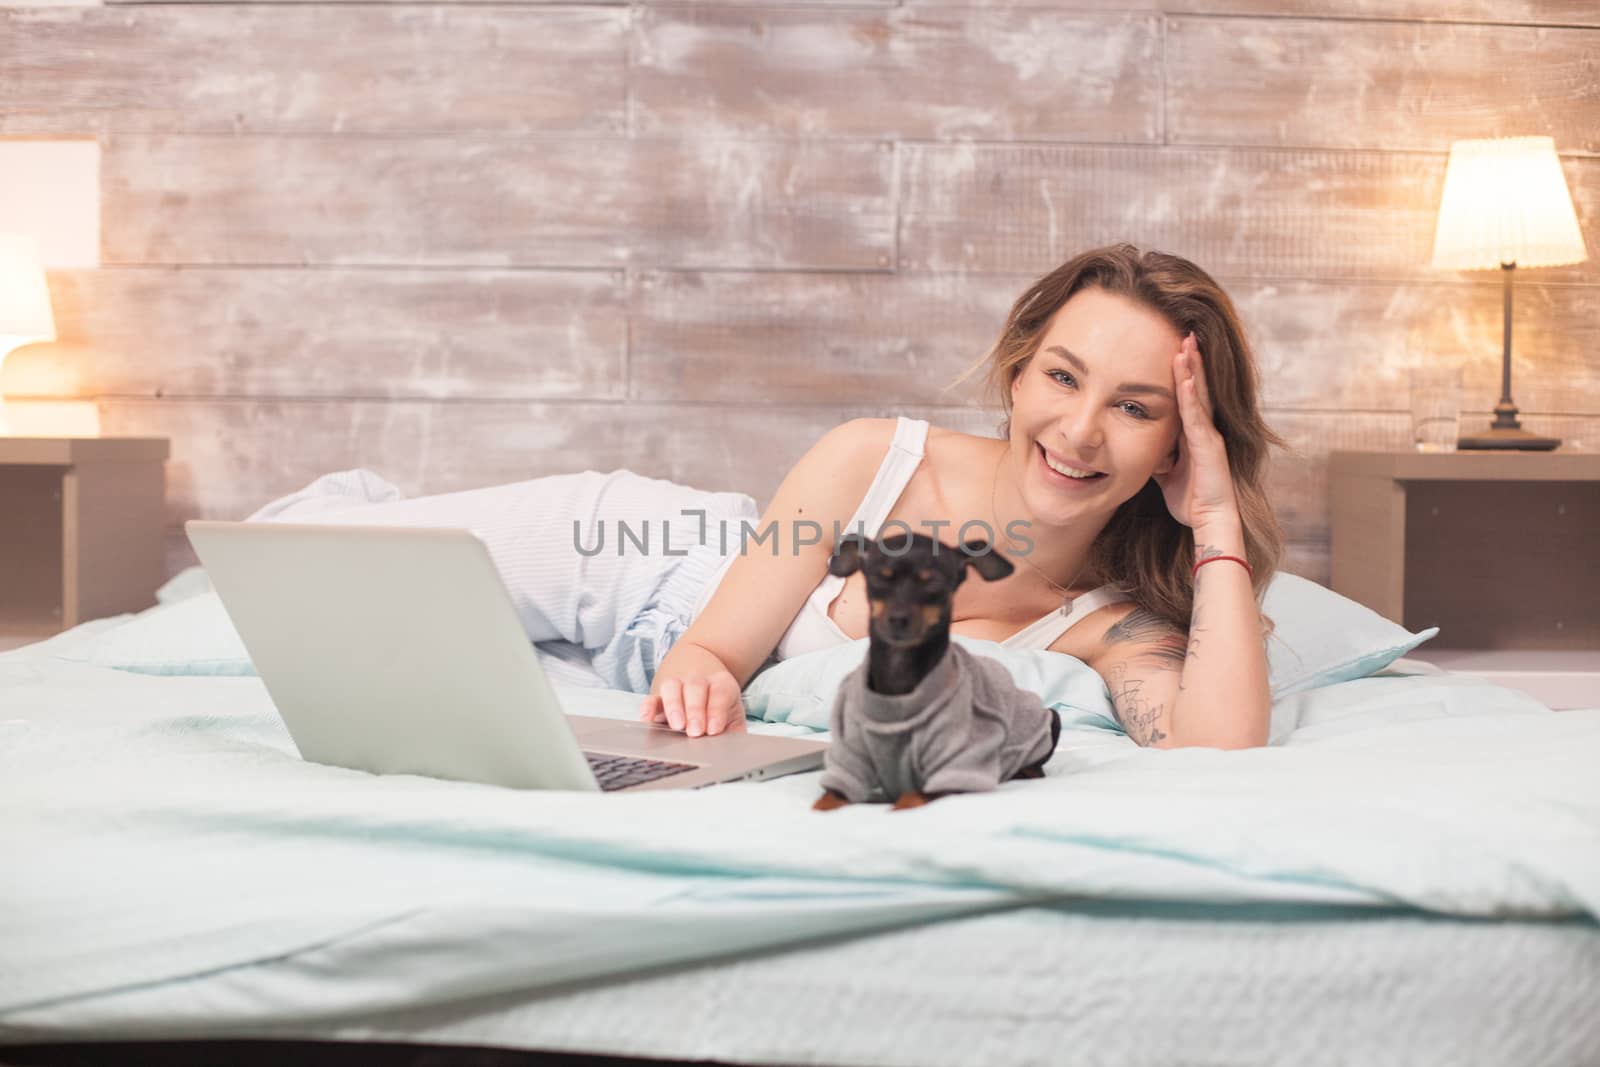 Young woman laughing while using her laptop in bed wearing pajamas. Little dog.